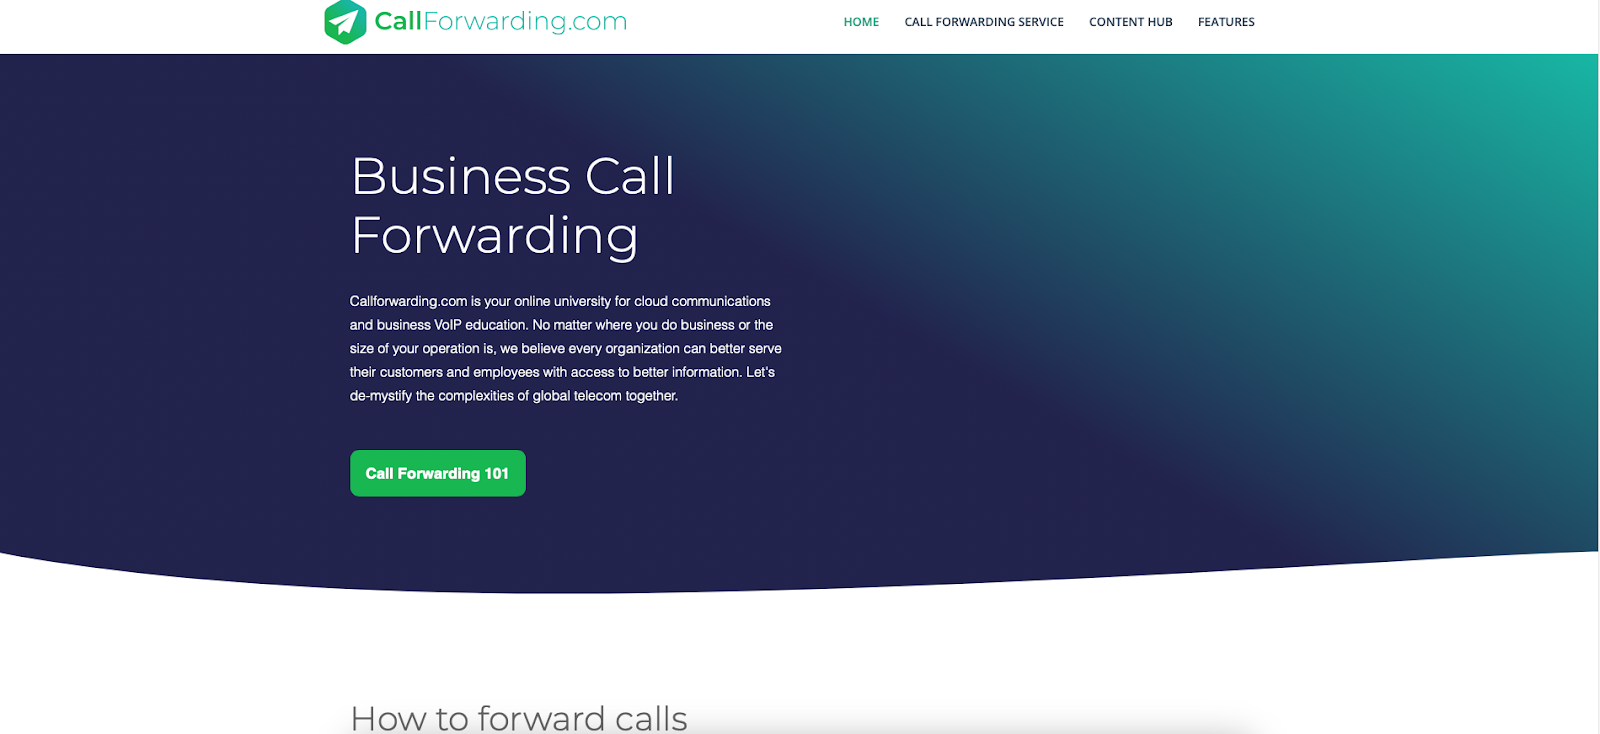 CallForwarding website snapshot highlighting the services it offers.